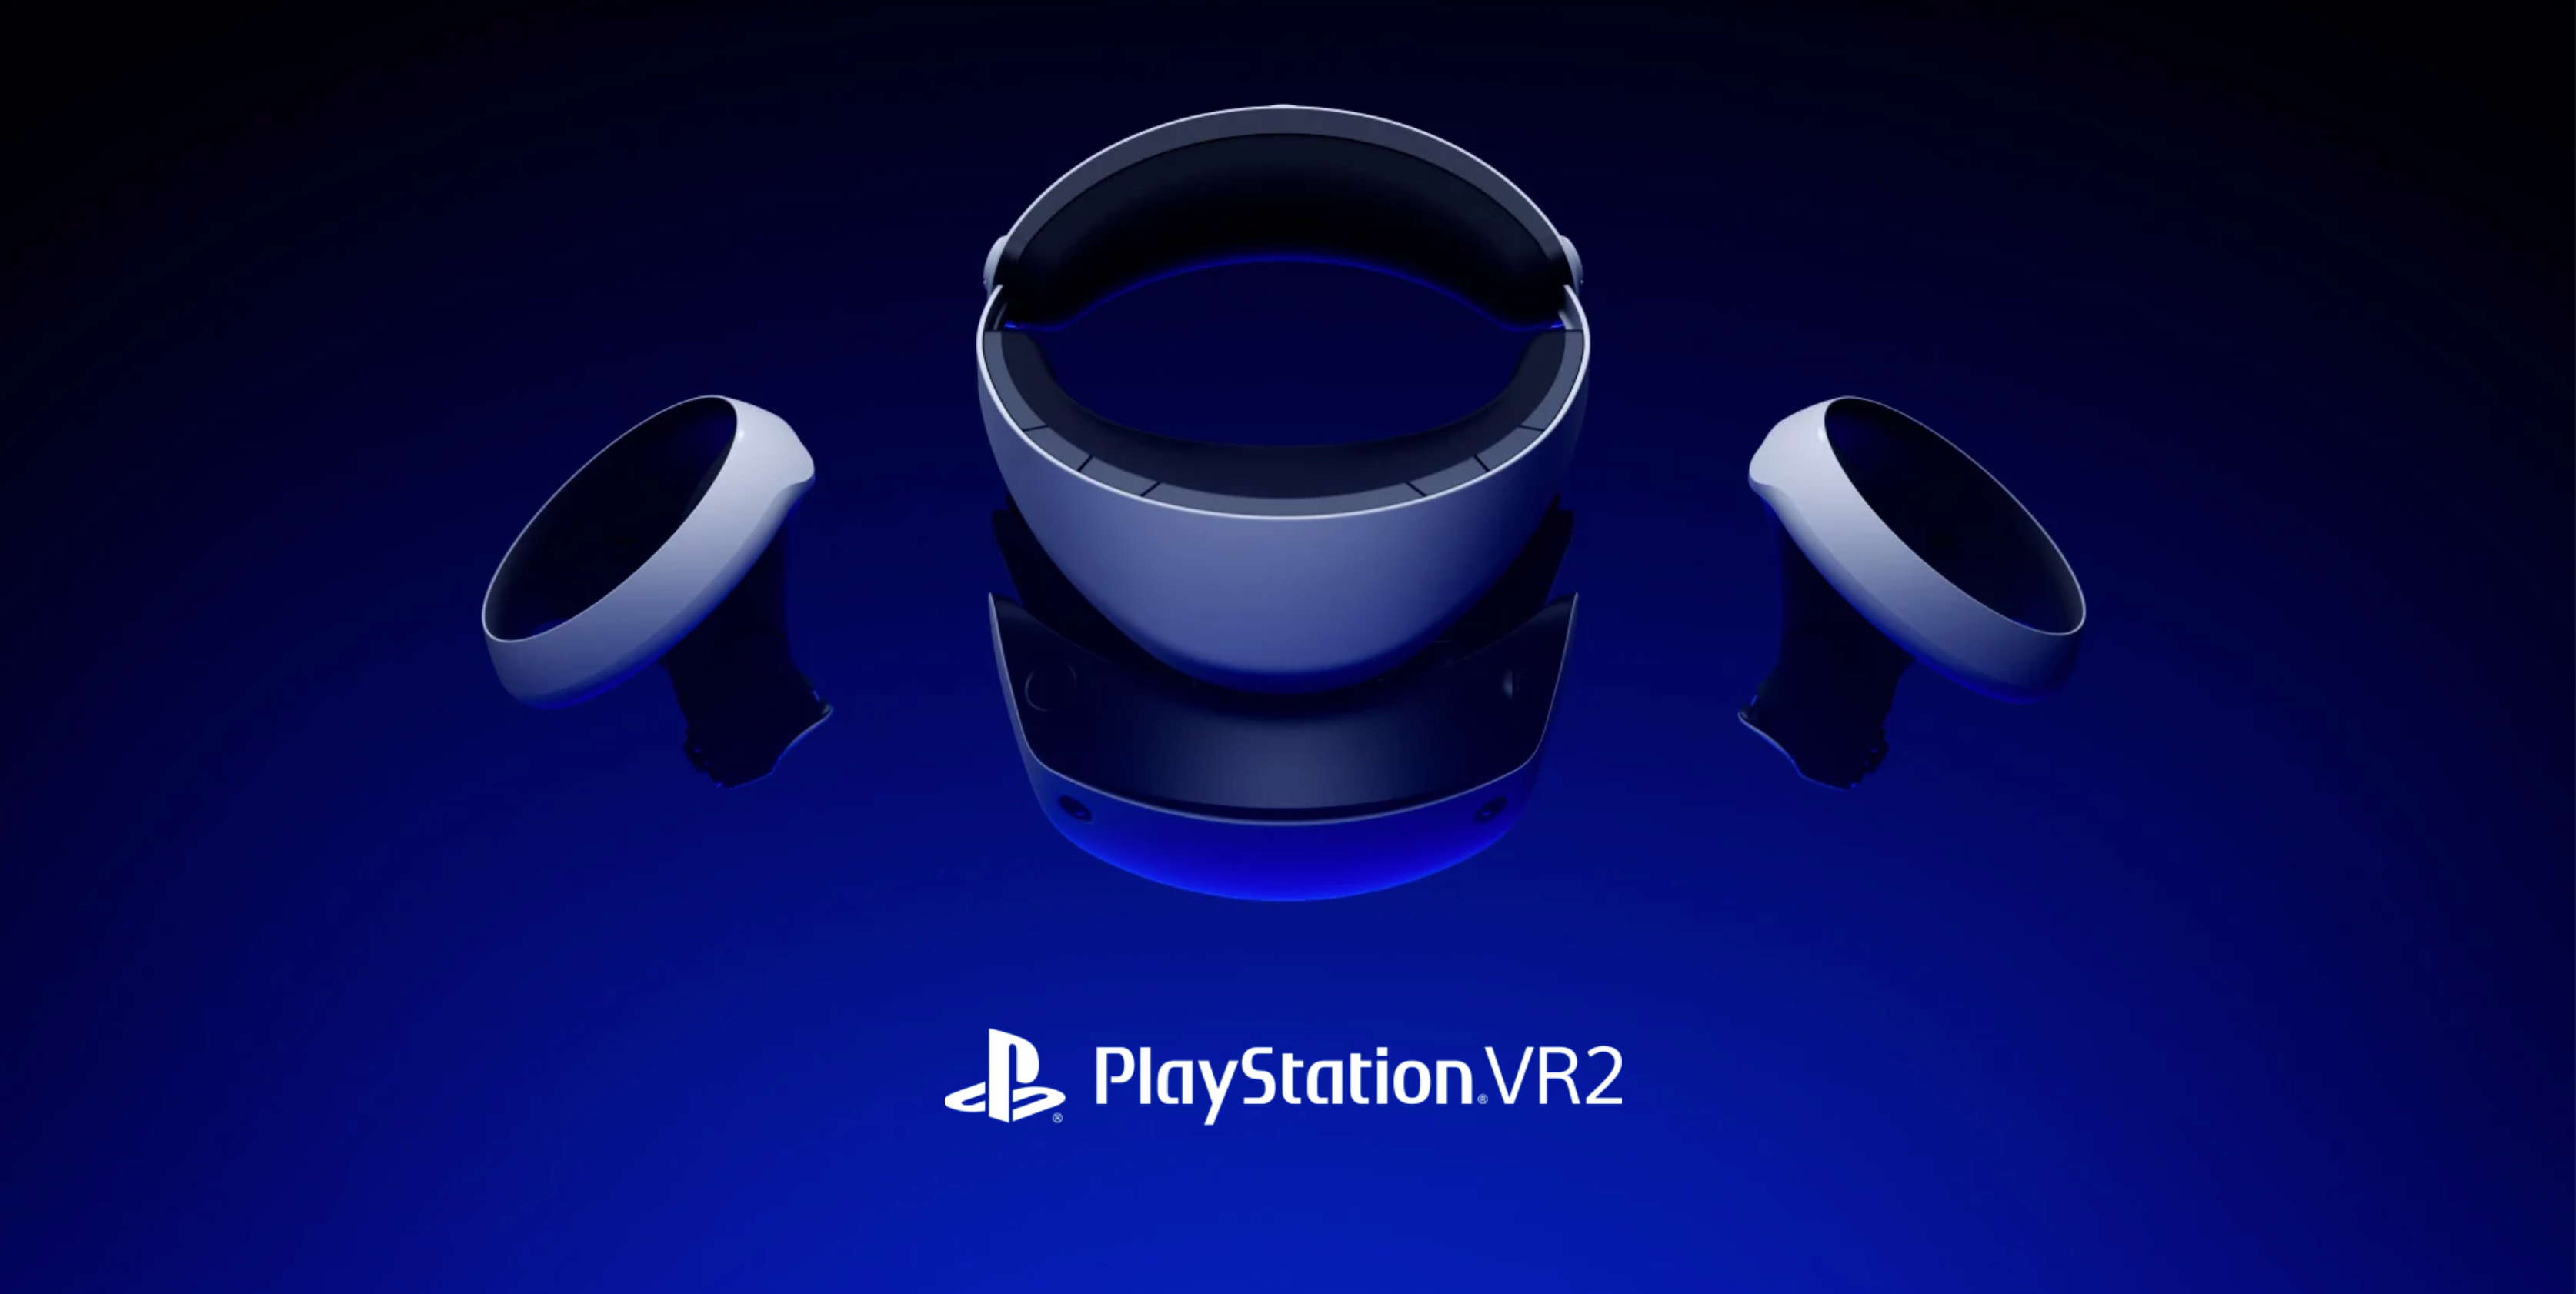 The Price Of The Future Of Gaming: PlayStation VR2 Will Arrive In 2023 & Cost $550 (Pre-Sale Has Started But There's A Catch)